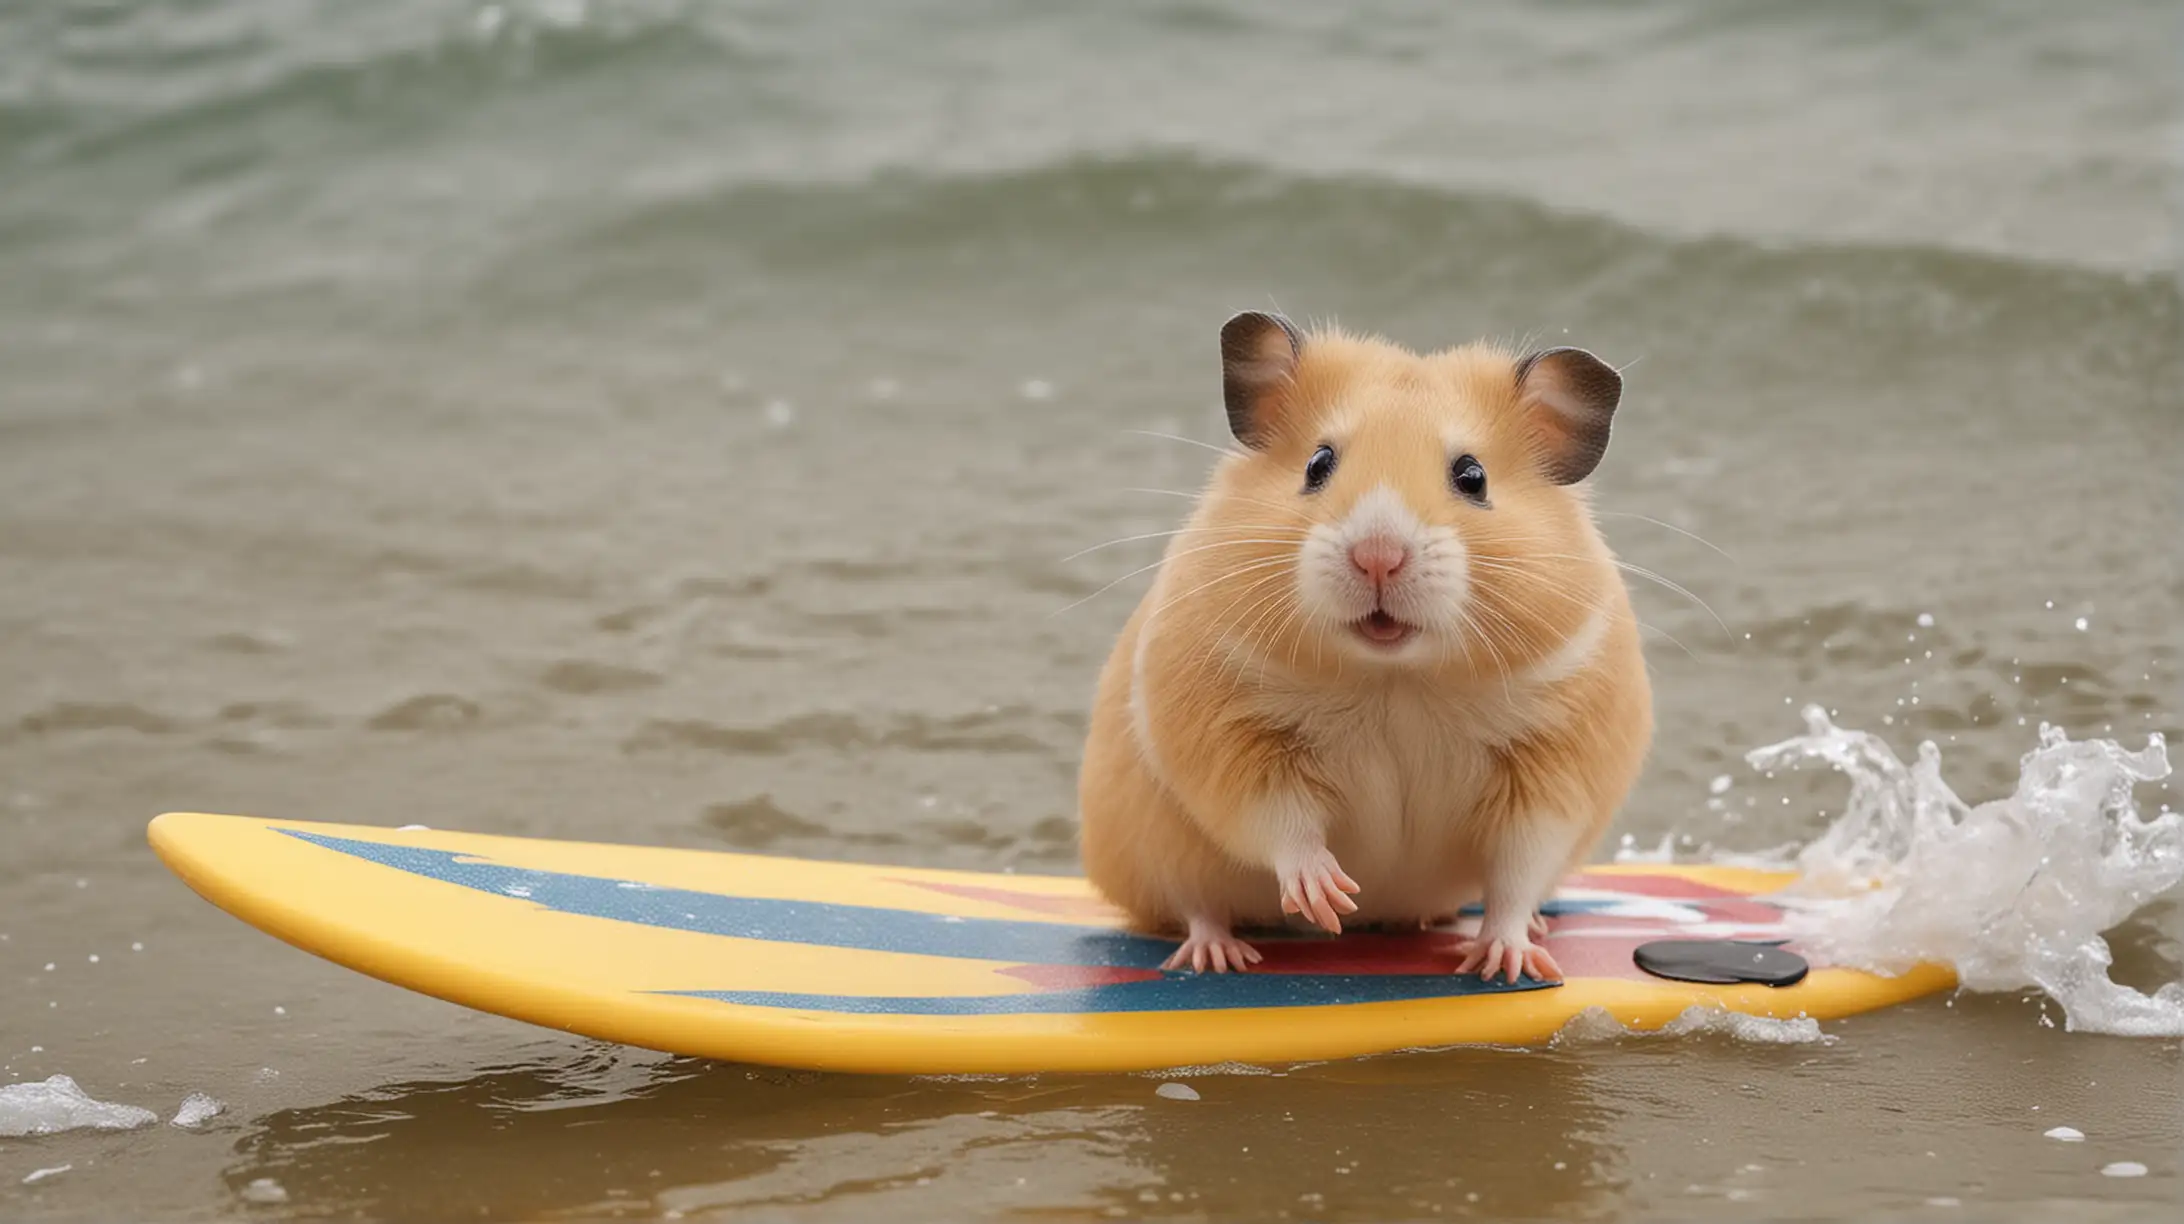 Adorable Hamster Surfing at the Beach with a Surfboard